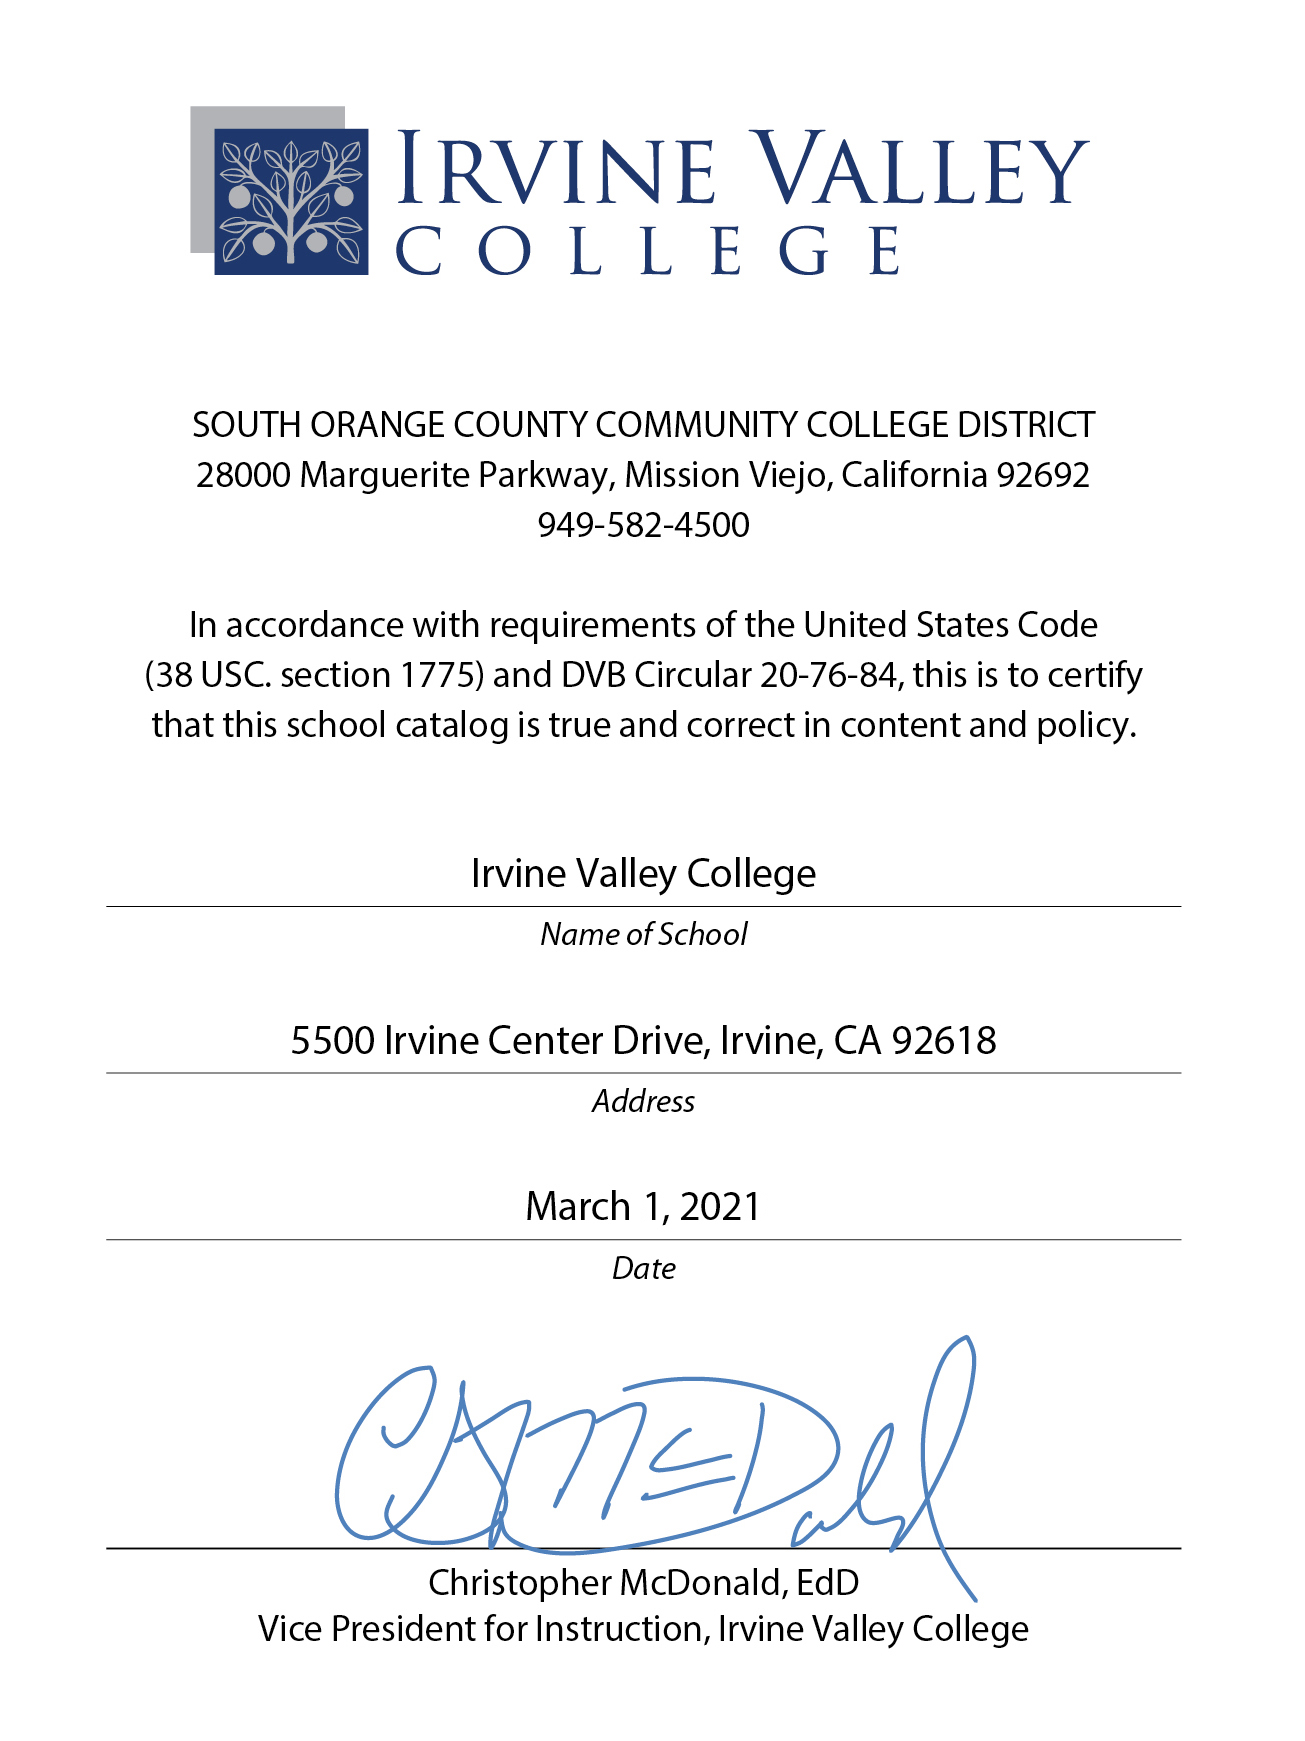 IVC Catalog Certification graphic. The image lists the IVC logo, the address of the South Orange County Community College District, and a statement that in accordance with requirements of the United States Code (38 USC. section 1775) and DVC Circular 20-76-84, this is to certify that this school catalog is true and correct in content and policy. It is signed by IVC Vice President for Instruction Christopher McDonald, PhD, and is dated April 3, 2017.